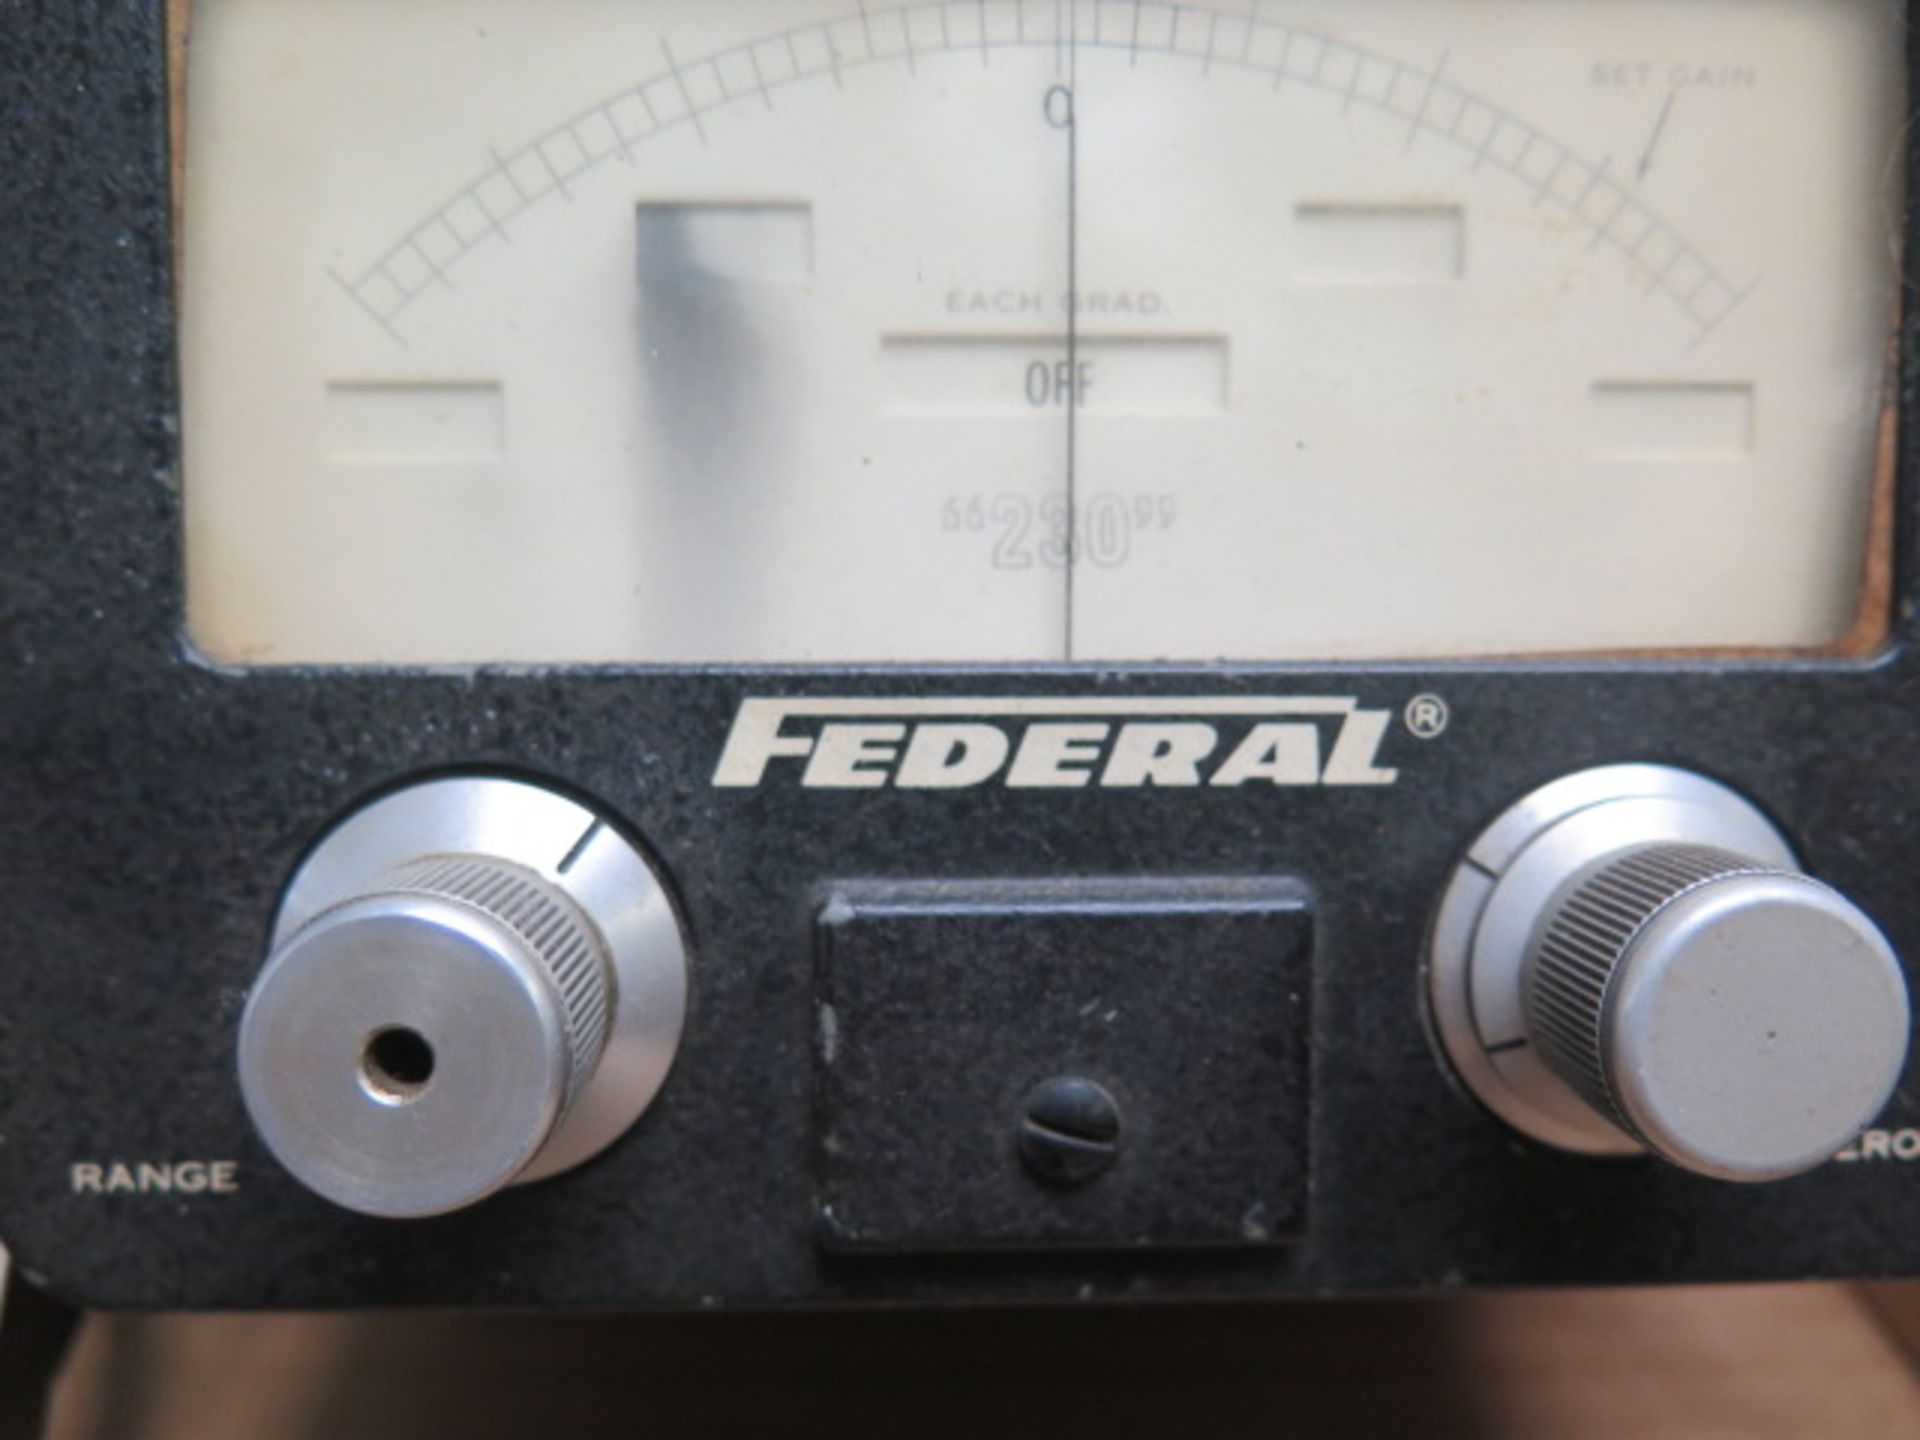 Federal Electronic Test Indicator (SOLD AS-IS - NO WARRANTY) - Image 4 of 4